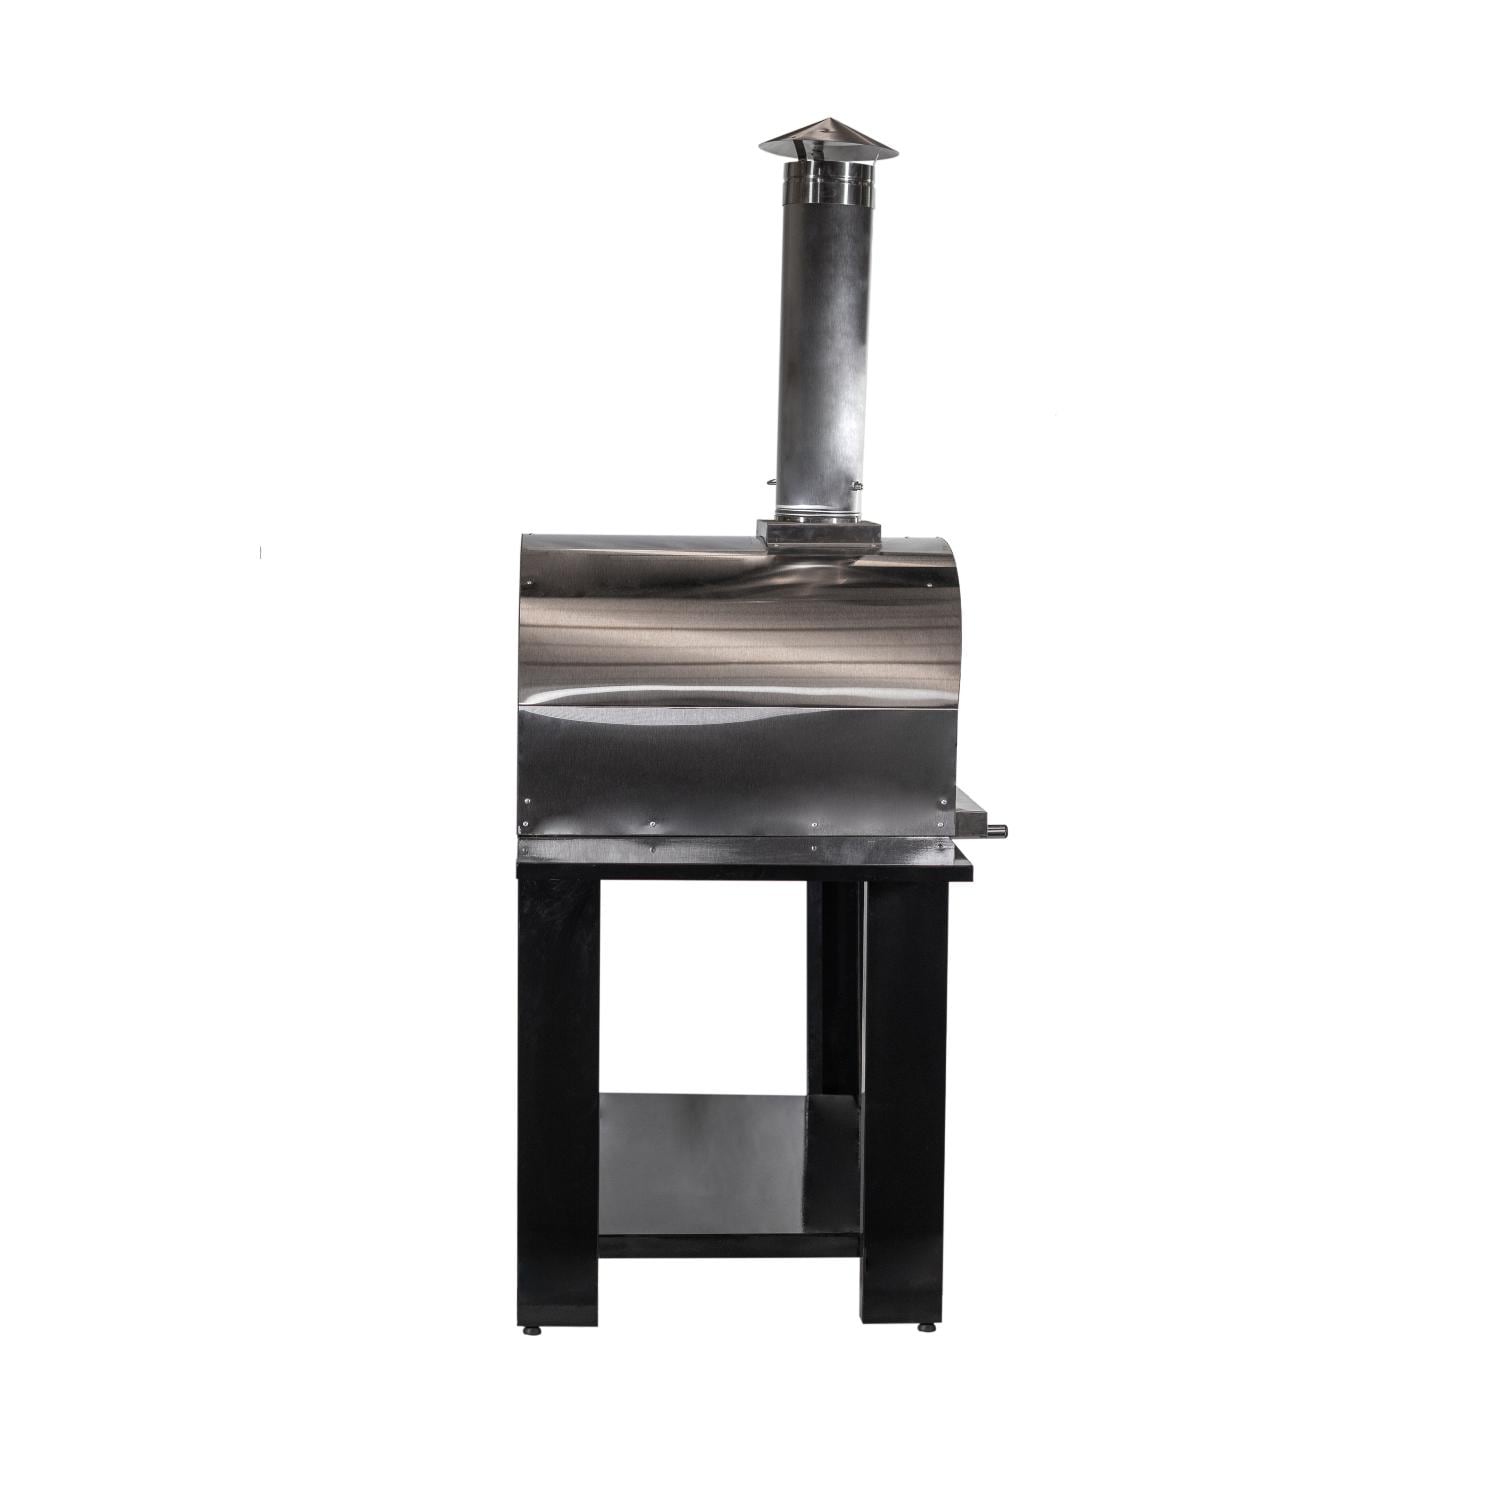 Nuke 31 Inch Outdoor Wood Fired Stainless Steel Freestanding Pizza Cooking Oven - image 4 of 6